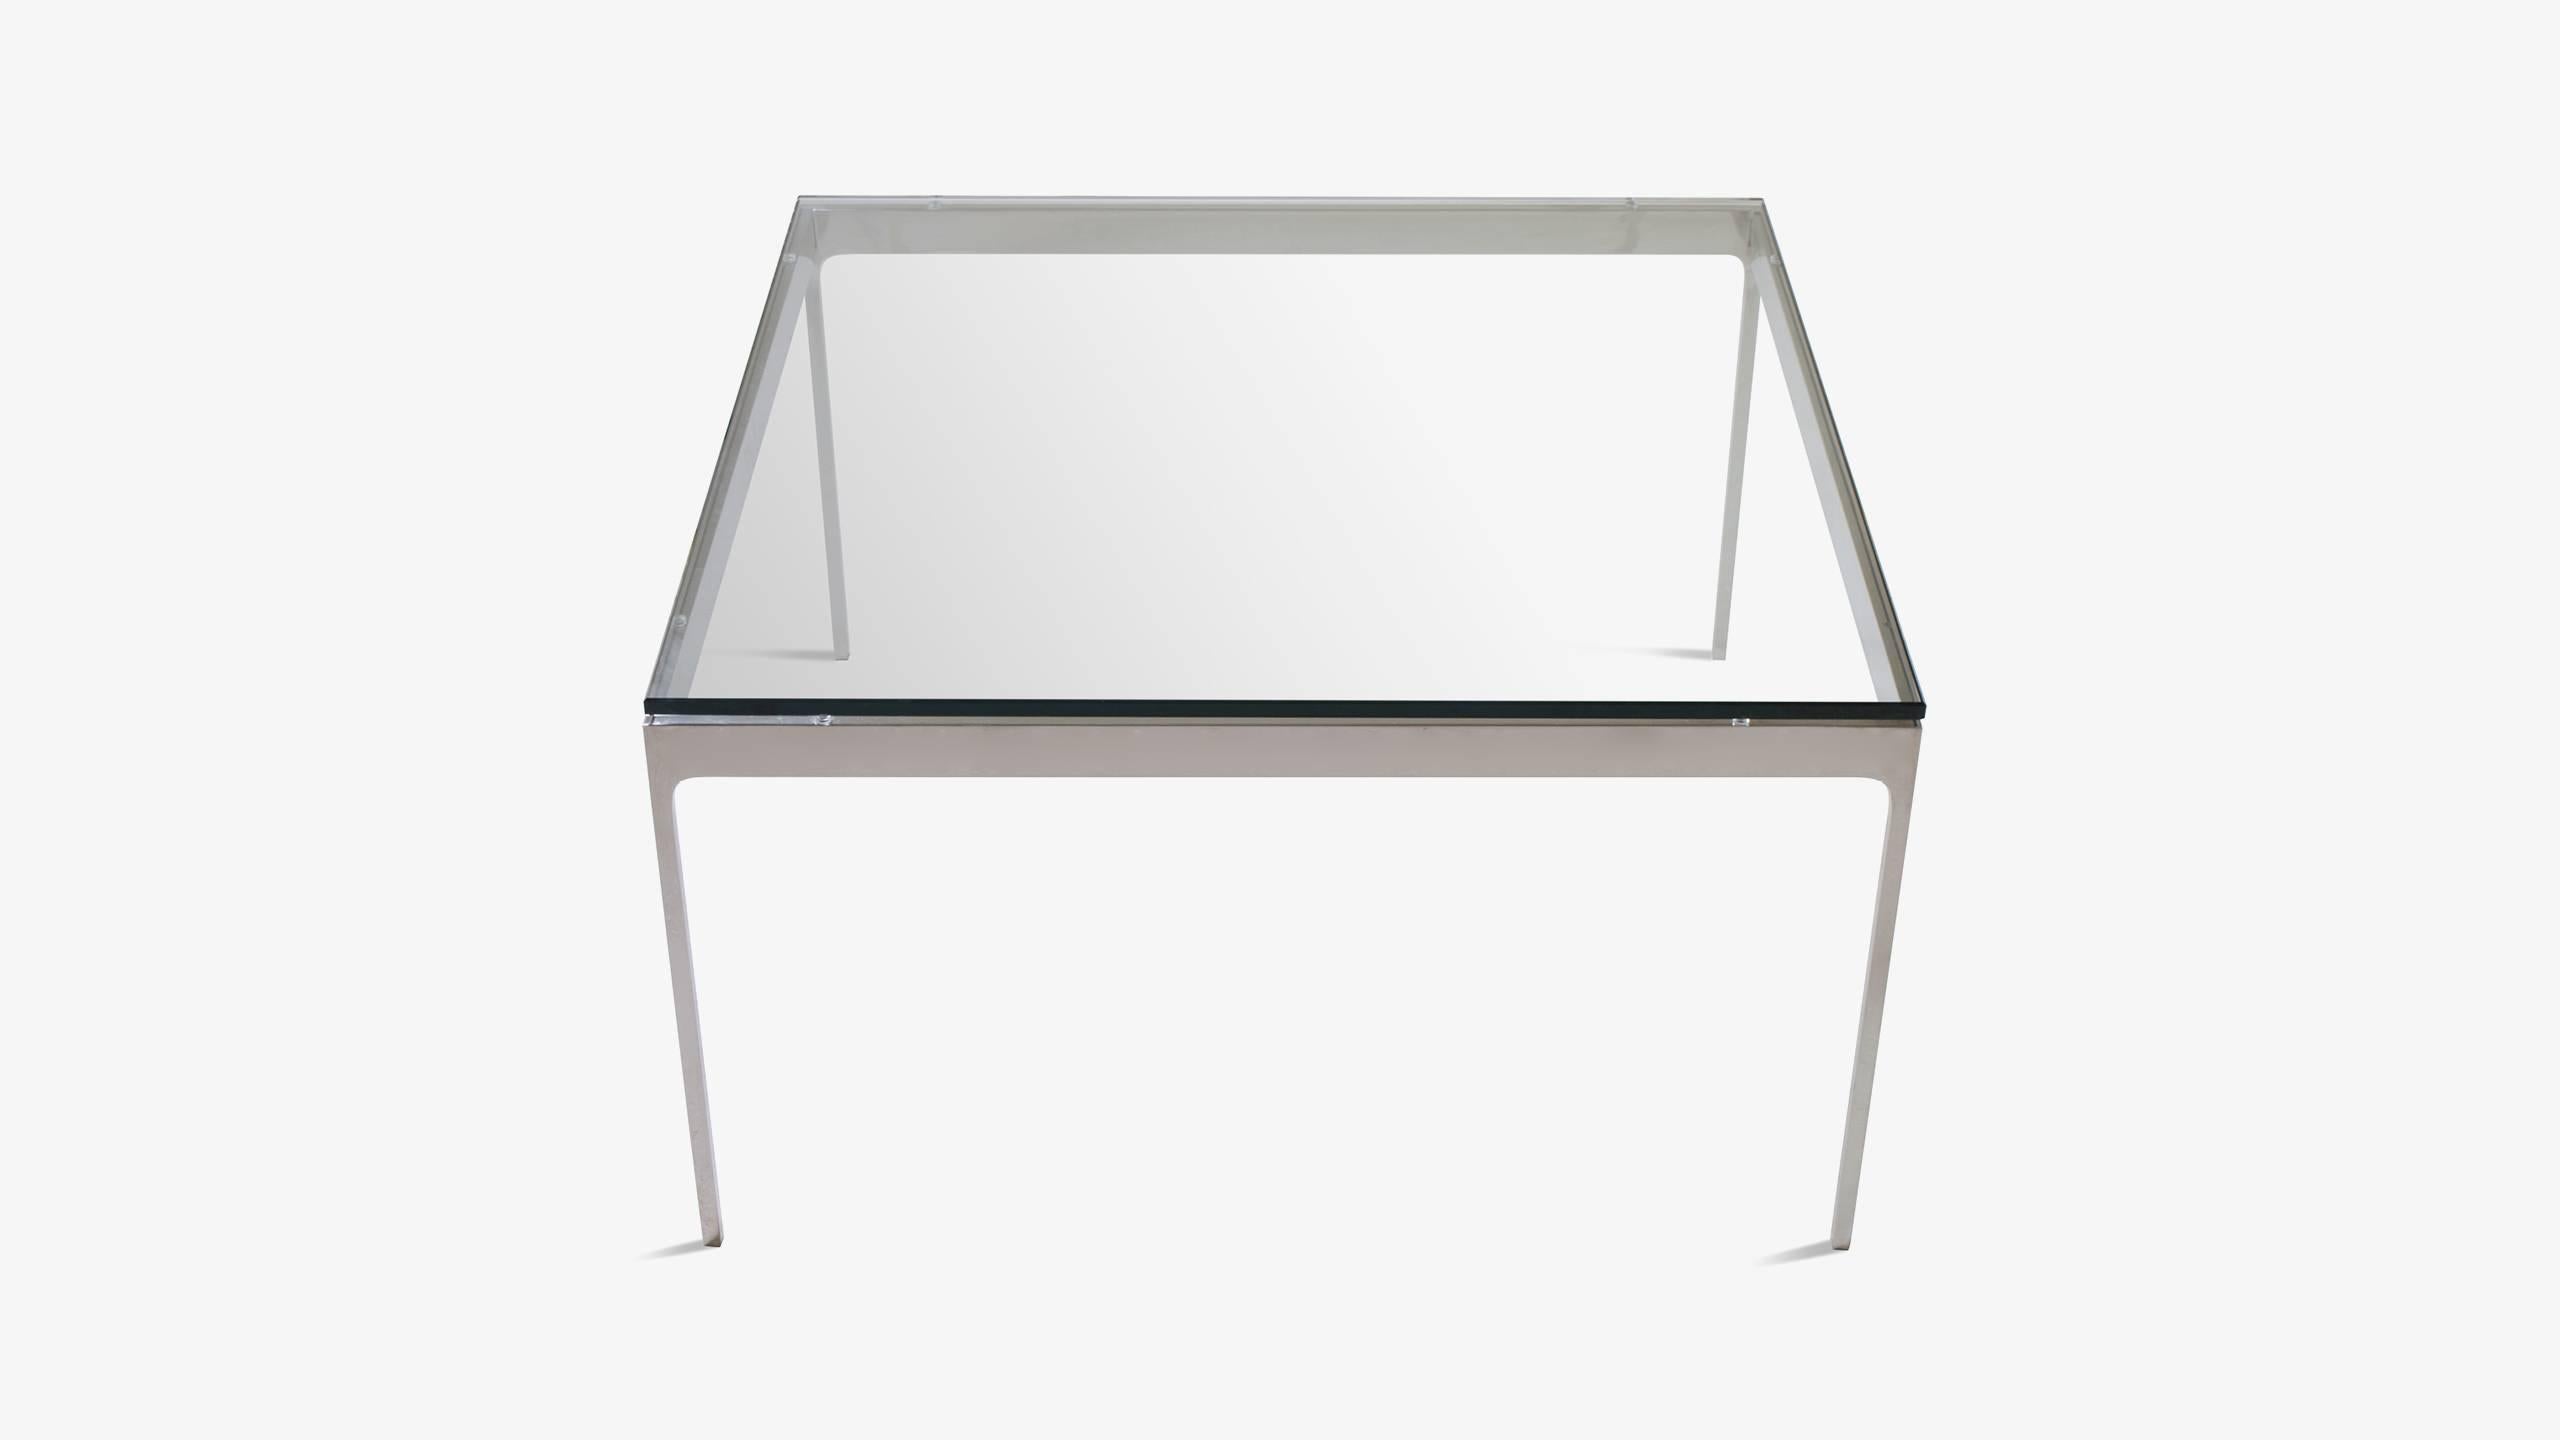 The essence of minimalism exists in this subtle design by Nicos Zographos. Solid stainless steel stock creates a Classic Mid-Century frame with some graceful additions. Zographos' attention to detail is noted by the delicate curved corners which